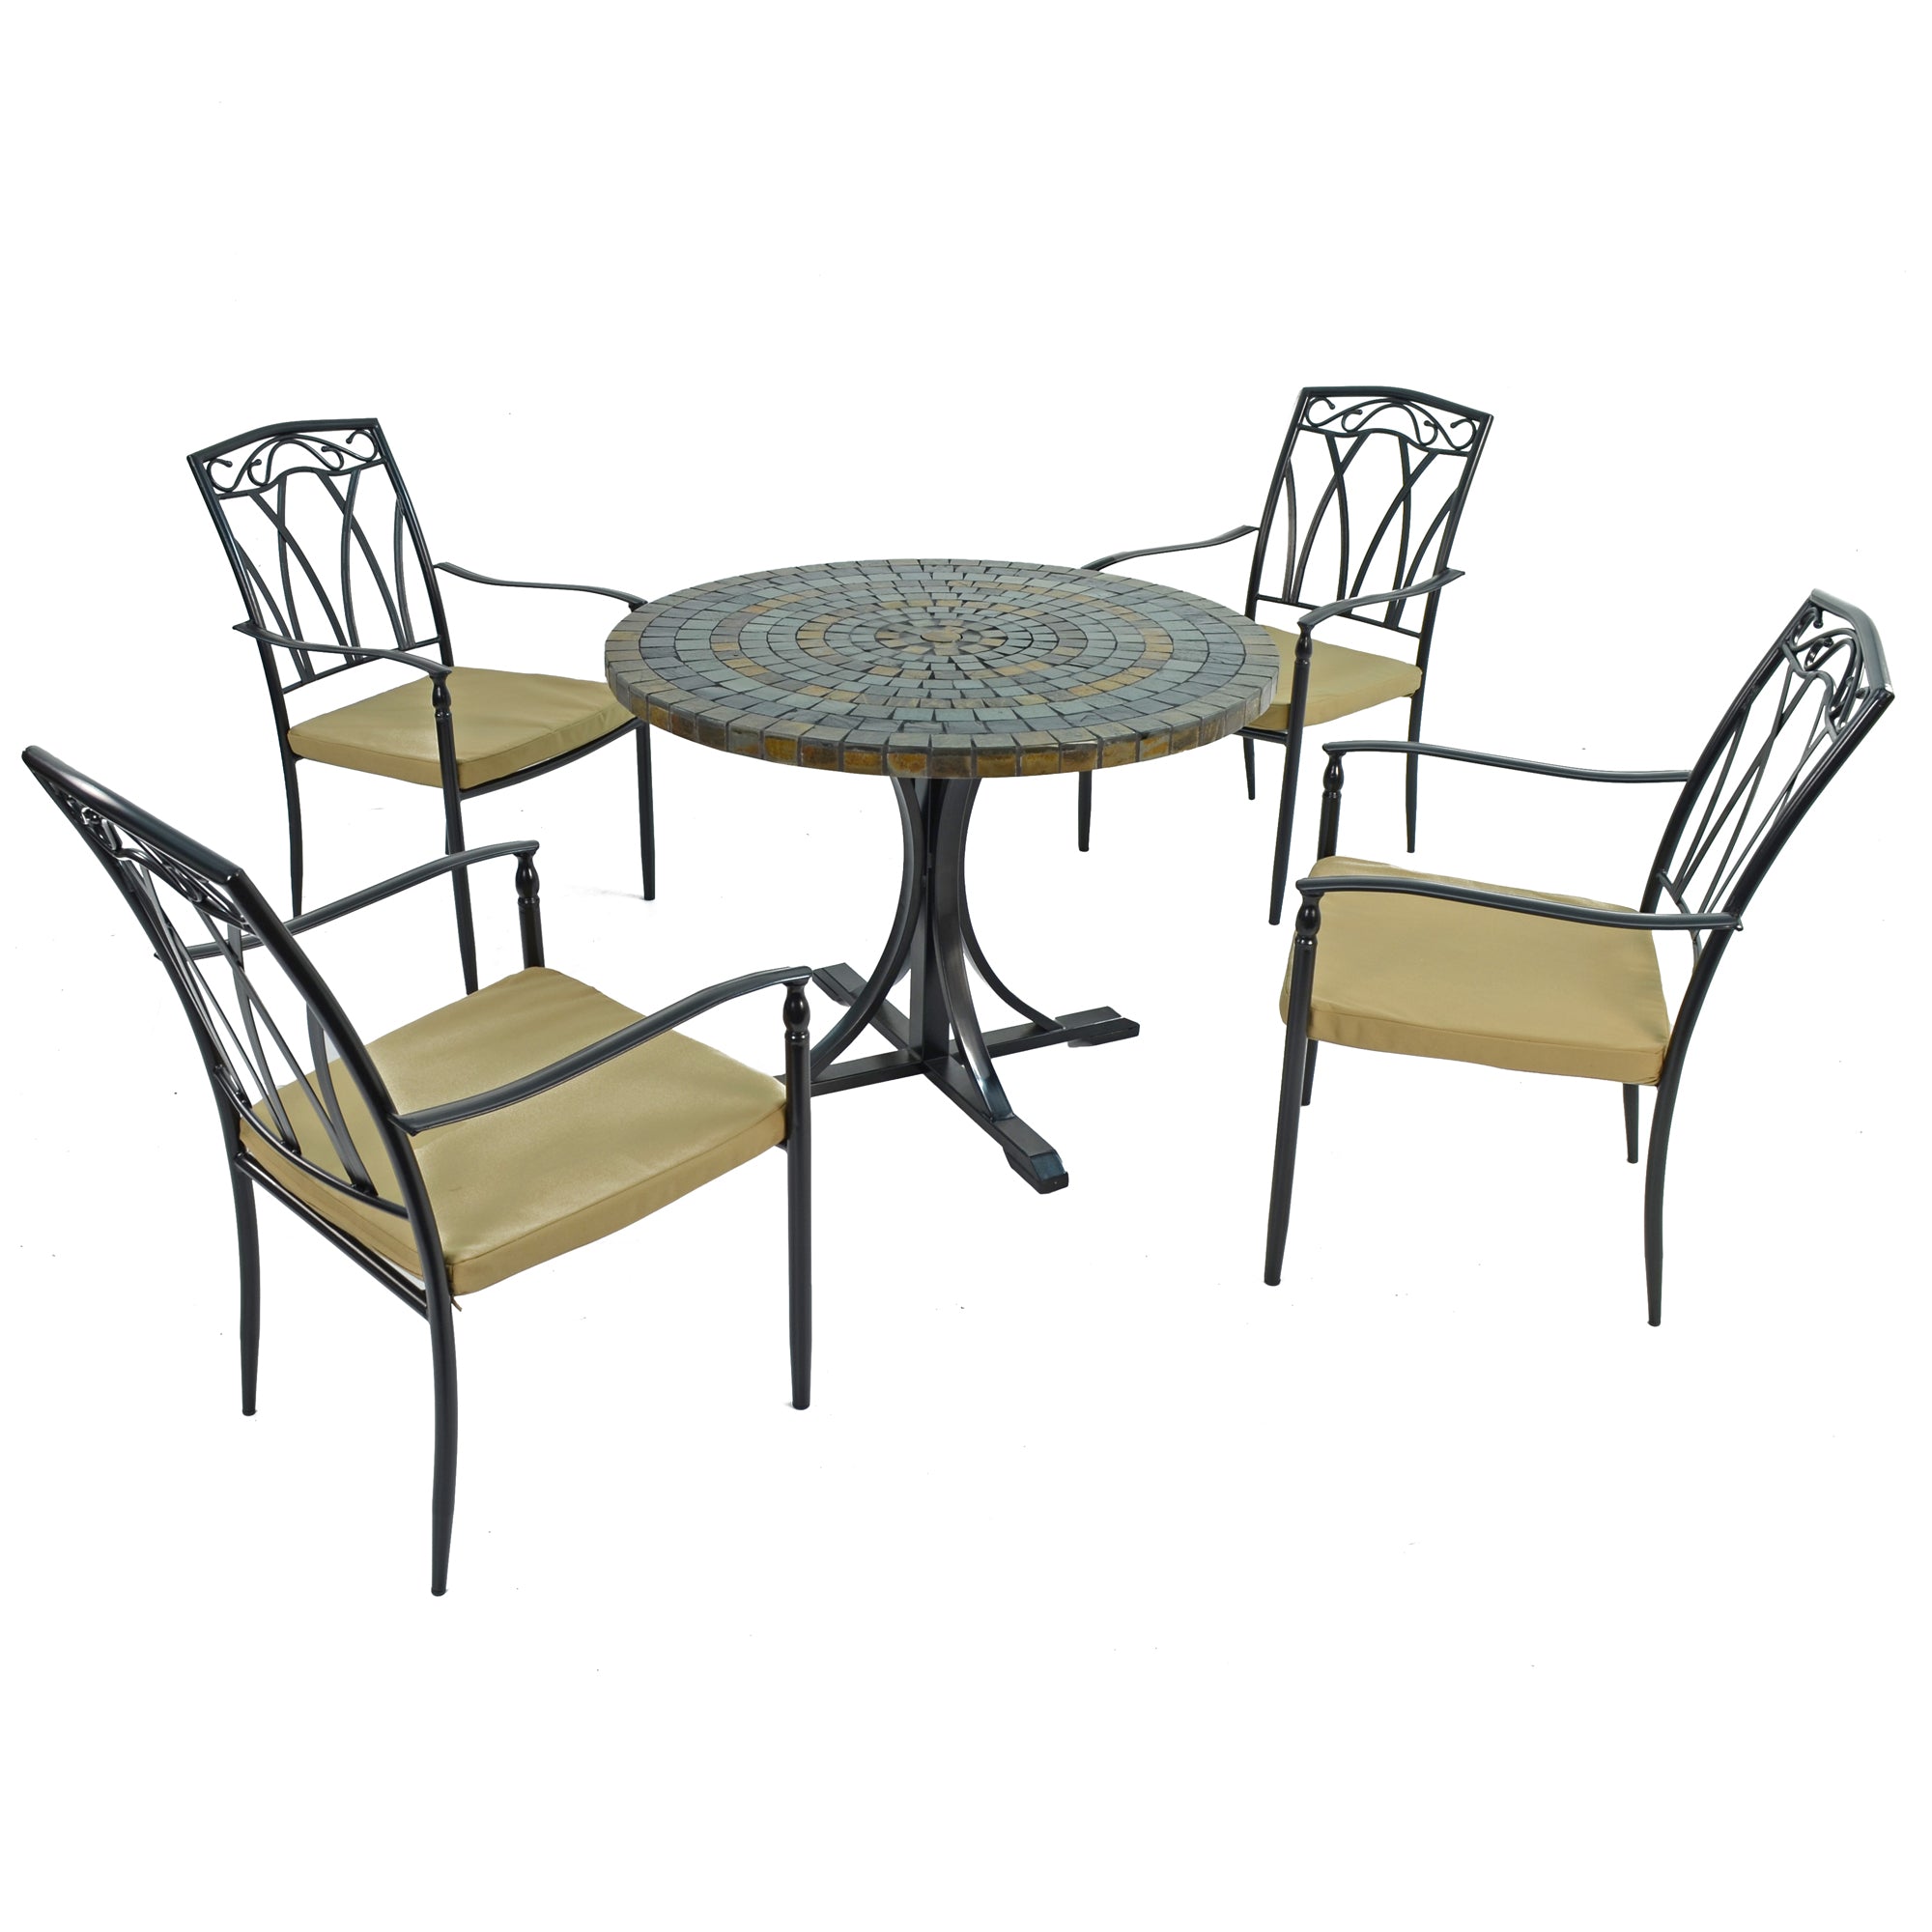 Byron Manor Monterey Stone Garden Mosaic Dining Table with 4 Ascot Chairs Dining Sets Byron Manor   